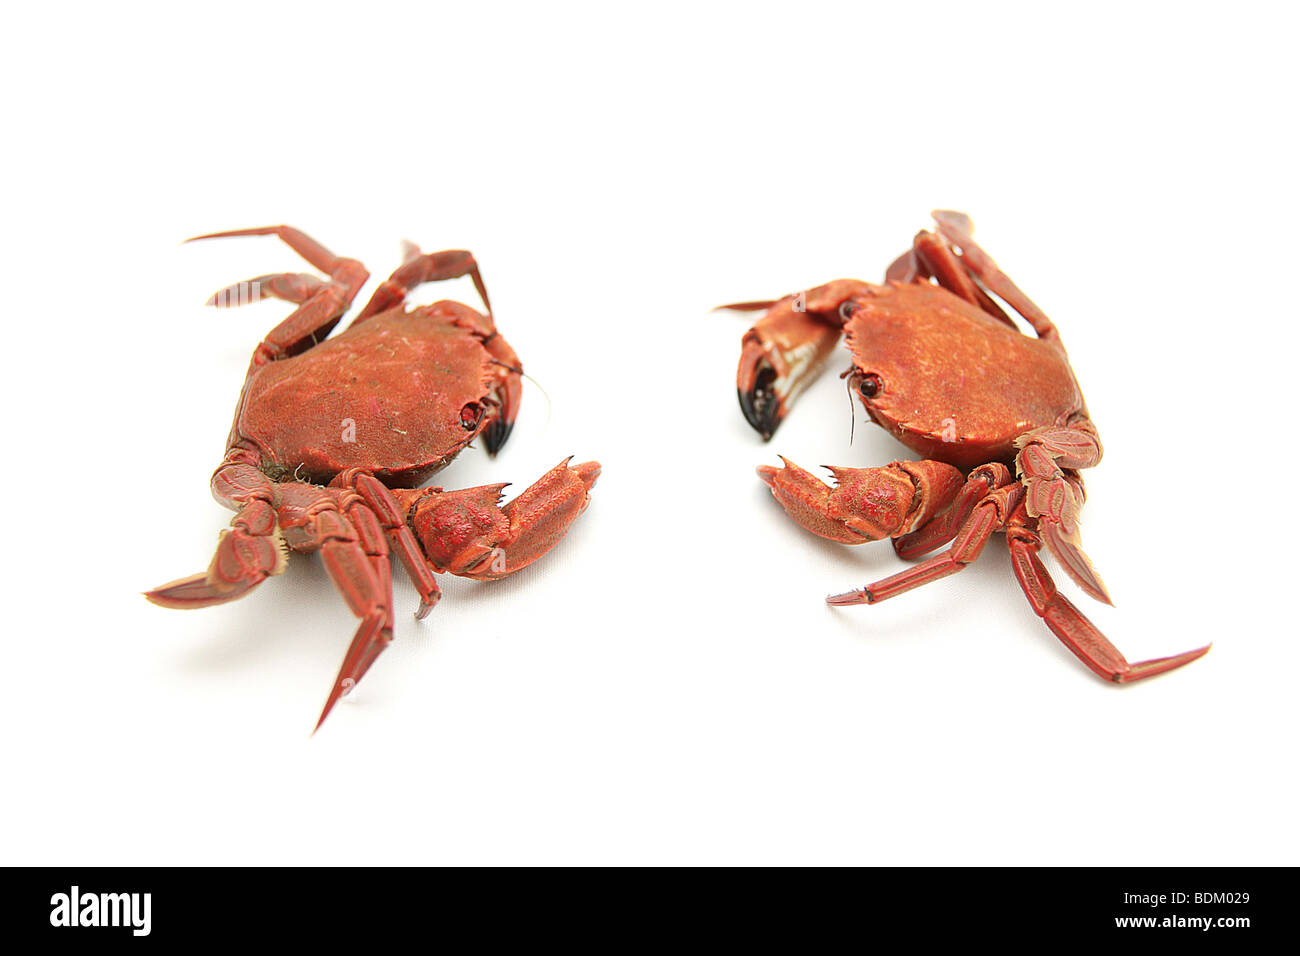 two little crabs facing ready to fight on isolated background Stock Photo